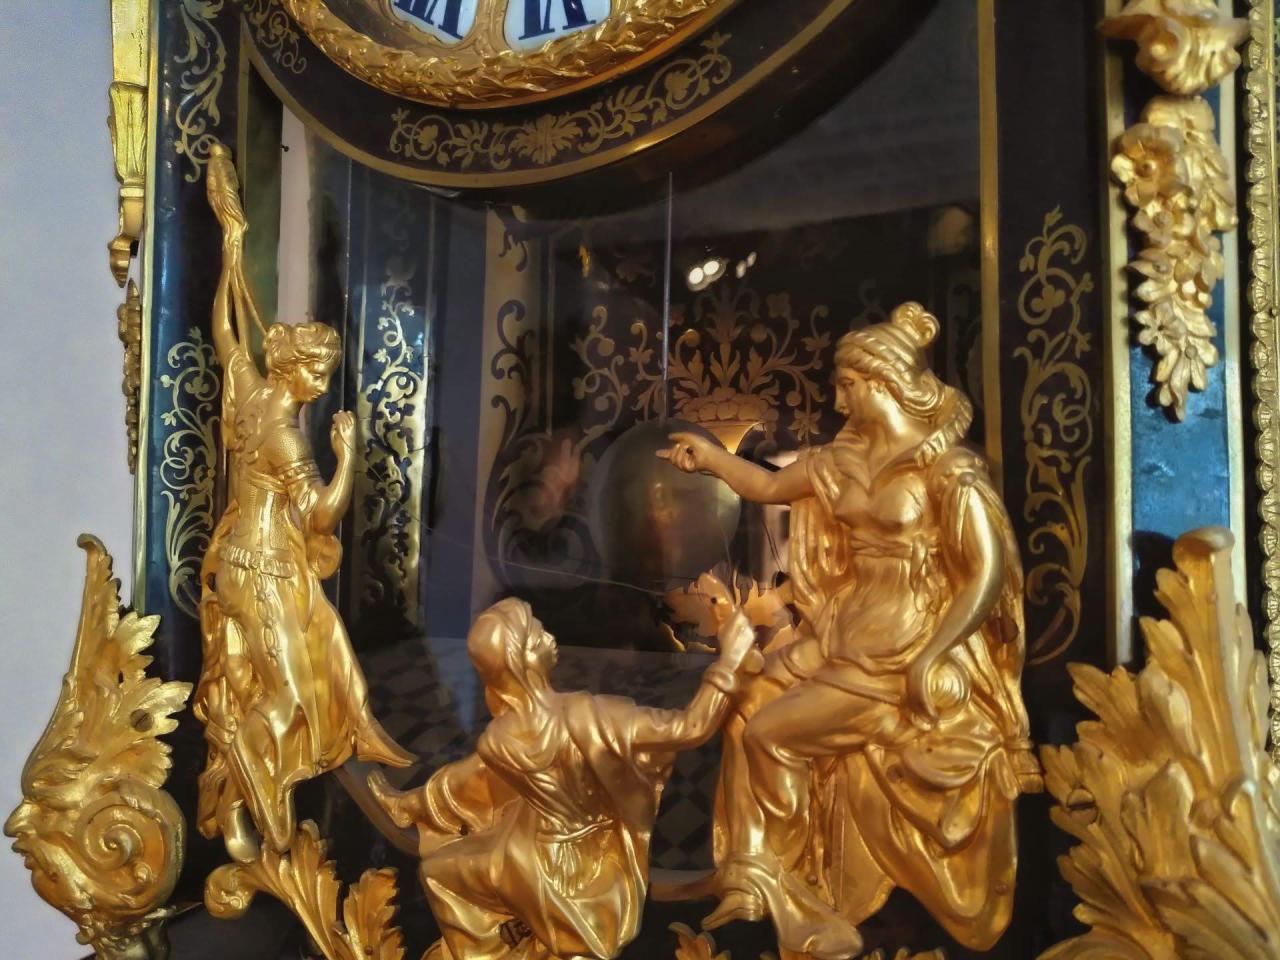 A clock with golden statuettes of the three Fates (Moirai) holding a thread